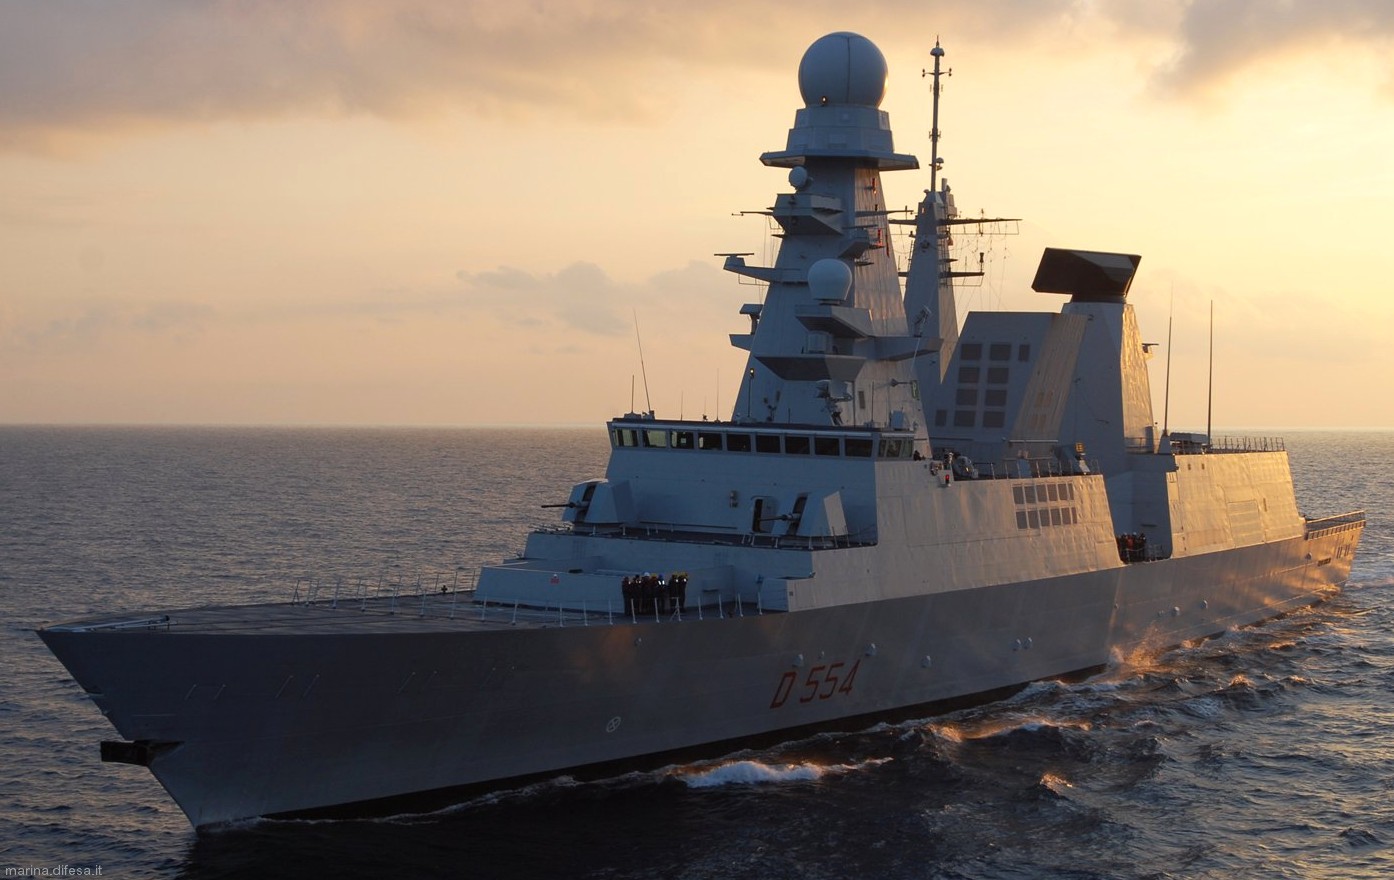 d-554 caio duilio its nave horizon class guided missile destroyer italian navy 14